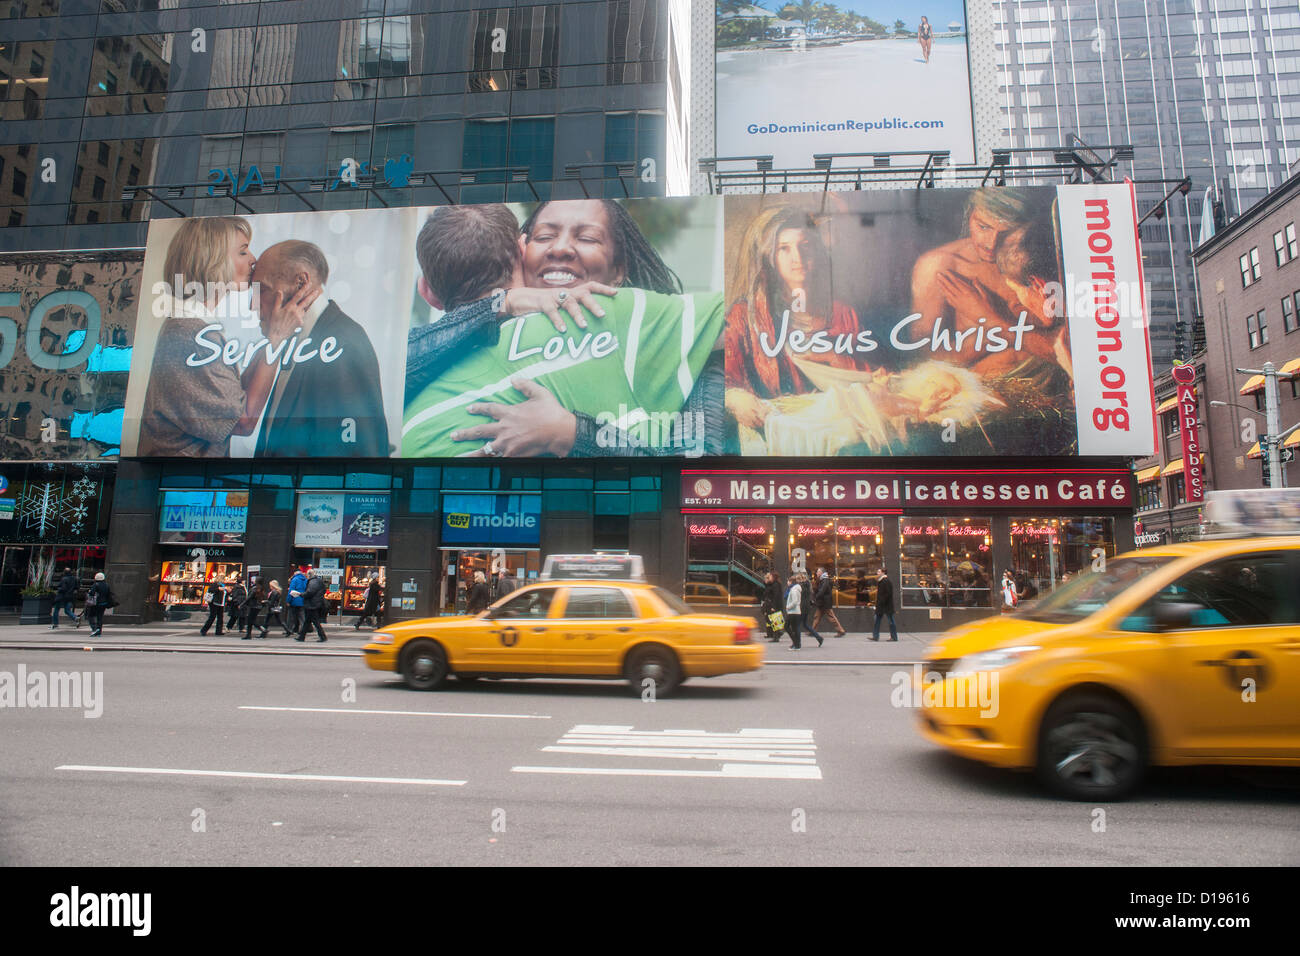 A billboard for The Church of Jesus Christ of Latter-day Saints in Times Square in New York Stock Photo